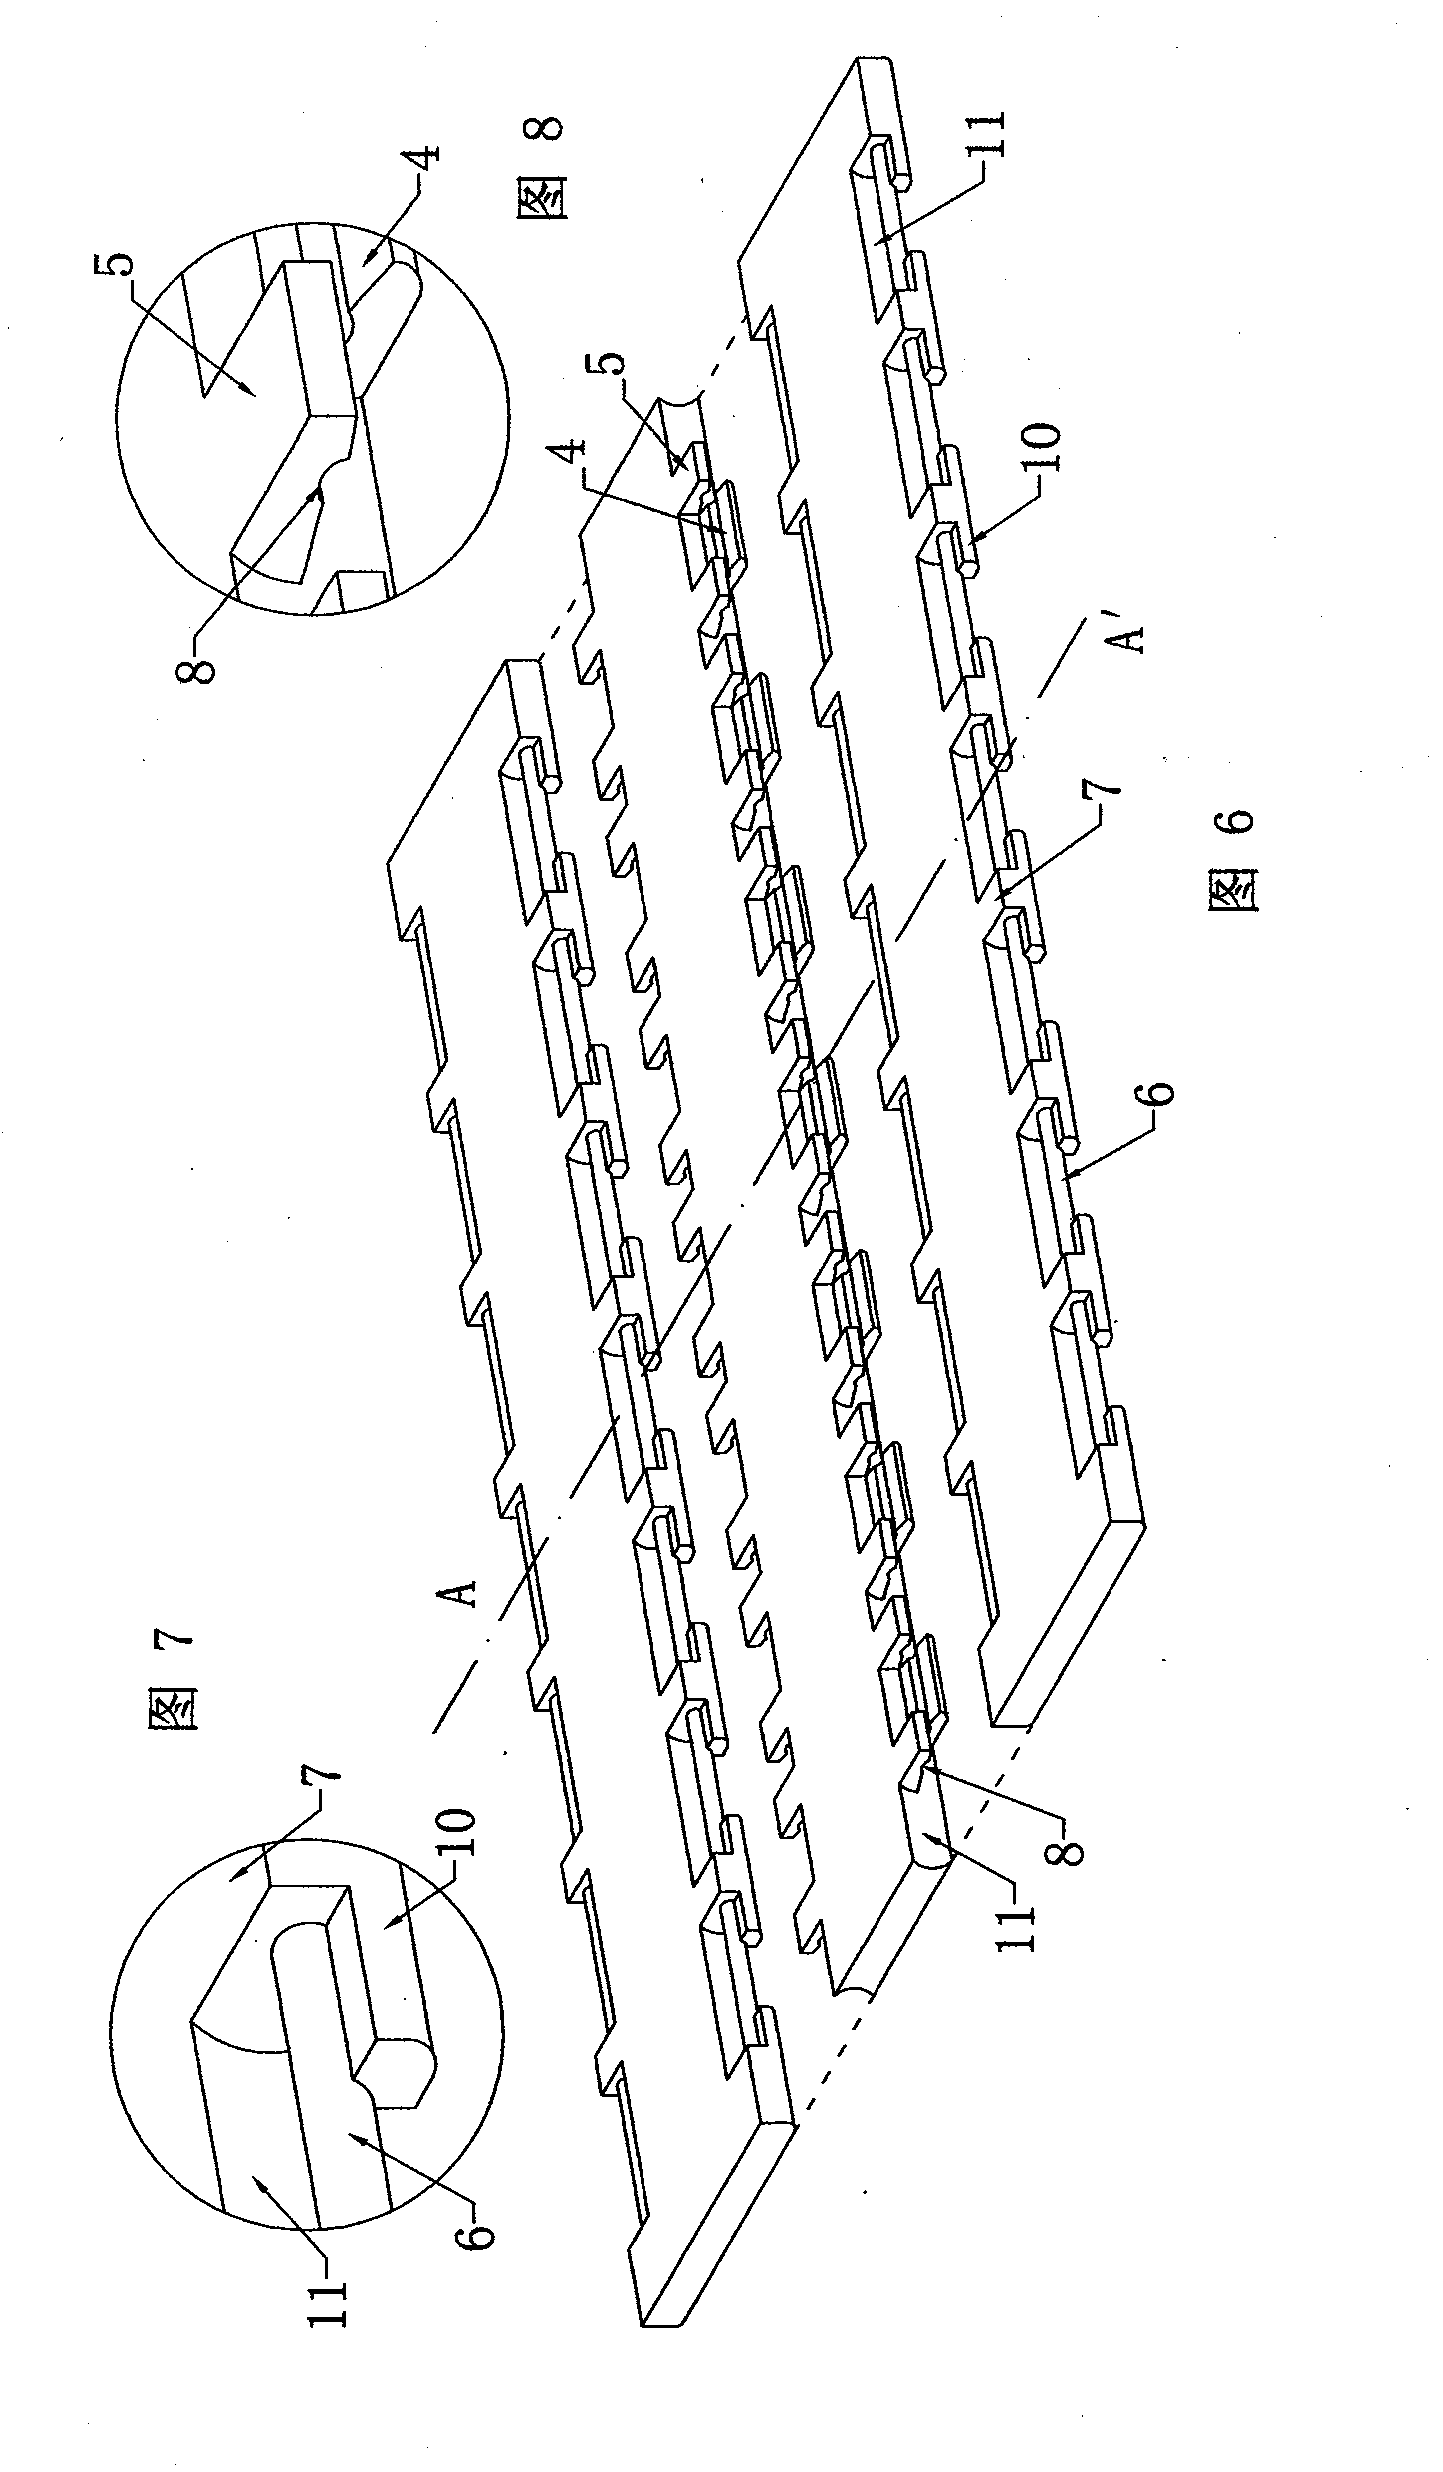 Appliances with clamping-interlinking-replicating structure